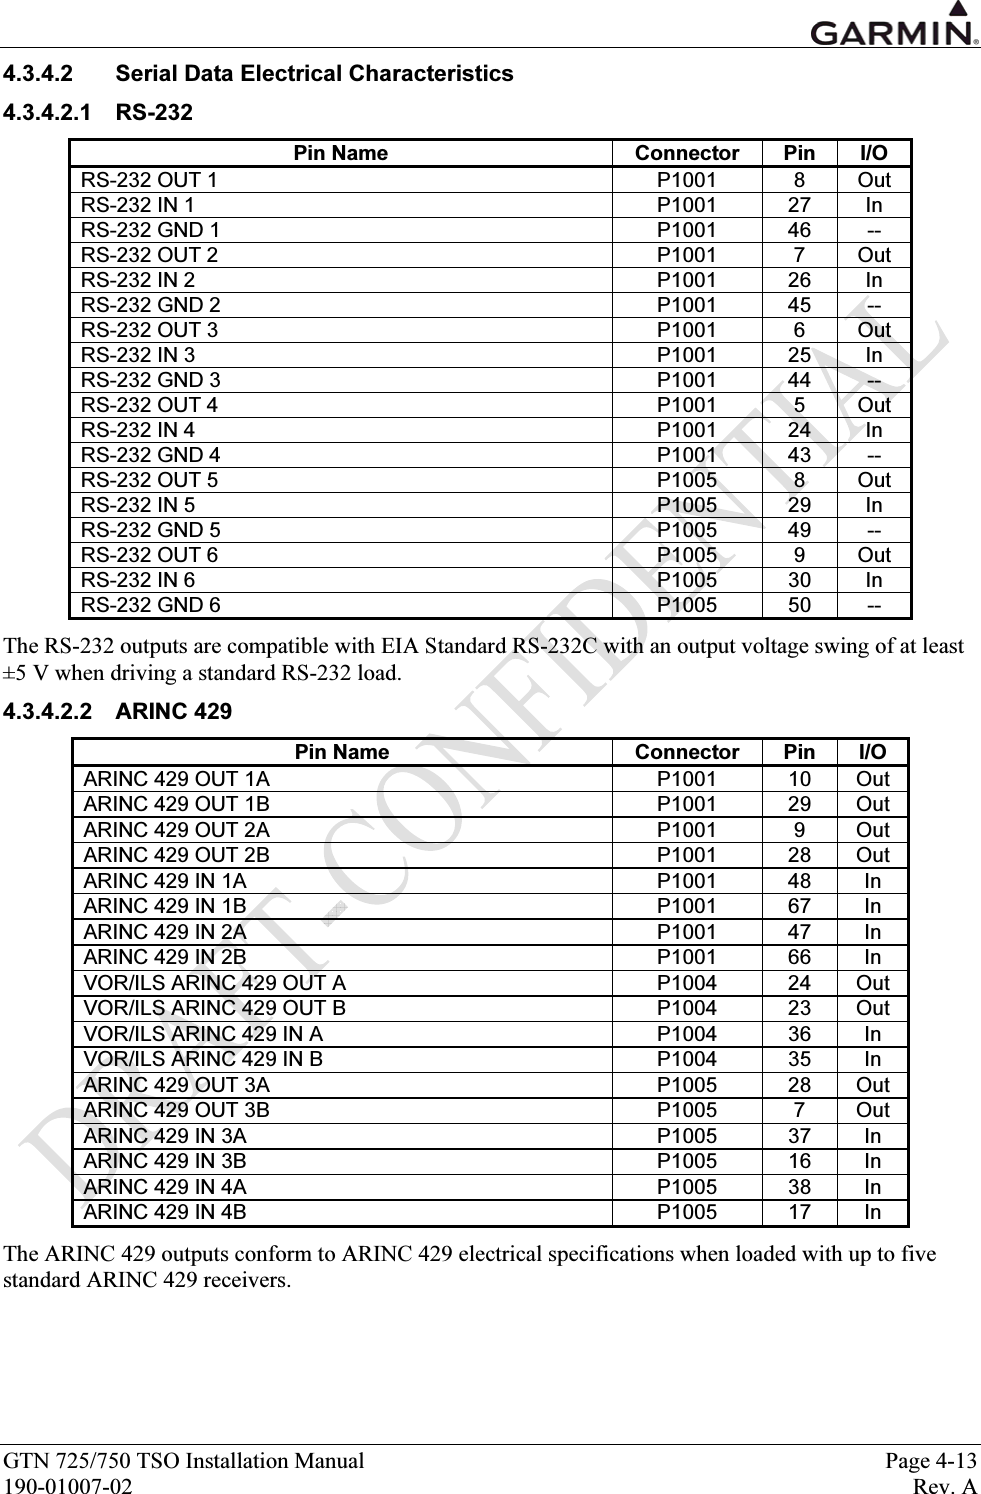  GTN 725/750 TSO Installation Manual  Page 4-13 190-01007-02  Rev. A 4.3.4.2  Serial Data Electrical Characteristics 4.3.4.2.1 RS-232 Pin Name  Connector  Pin  I/O RS-232 OUT 1  P1001  8  Out RS-232 IN 1  P1001  27  In RS-232 GND 1  P1001  46  -- RS-232 OUT 2  P1001  7  Out RS-232 IN 2  P1001  26  In RS-232 GND 2  P1001  45  -- RS-232 OUT 3  P1001  6  Out RS-232 IN 3  P1001  25  In RS-232 GND 3  P1001  44  -- RS-232 OUT 4  P1001  5  Out RS-232 IN 4  P1001  24  In RS-232 GND 4  P1001  43  -- RS-232 OUT 5  P1005  8  Out RS-232 IN 5  P1005  29  In RS-232 GND 5   P1005  49  -- RS-232 OUT 6  P1005  9  Out RS-232 IN 6  P1005  30  In RS-232 GND 6  P1005  50  -- The RS-232 outputs are compatible with EIA Standard RS-232C with an output voltage swing of at least ±5 V when driving a standard RS-232 load. 4.3.4.2.2 ARINC 429 Pin Name  Connector  Pin  I/O ARINC 429 OUT 1A  P1001  10  Out ARINC 429 OUT 1B  P1001  29  Out ARINC 429 OUT 2A  P1001  9  Out ARINC 429 OUT 2B  P1001  28  Out ARINC 429 IN 1A  P1001  48  In ARINC 429 IN 1B  P1001  67  In ARINC 429 IN 2A  P1001  47  In ARINC 429 IN 2B  P1001  66  In VOR/ILS ARINC 429 OUT A  P1004  24  Out VOR/ILS ARINC 429 OUT B  P1004  23  Out VOR/ILS ARINC 429 IN A  P1004  36  In VOR/ILS ARINC 429 IN B  P1004  35  In ARINC 429 OUT 3A   P1005  28  Out ARINC 429 OUT 3B   P1005  7  Out ARINC 429 IN 3A   P1005  37  In ARINC 429 IN 3B   P1005  16  In ARINC 429 IN 4A   P1005  38  In ARINC 429 IN 4B   P1005  17  In The ARINC 429 outputs conform to ARINC 429 electrical specifications when loaded with up to five standard ARINC 429 receivers. 